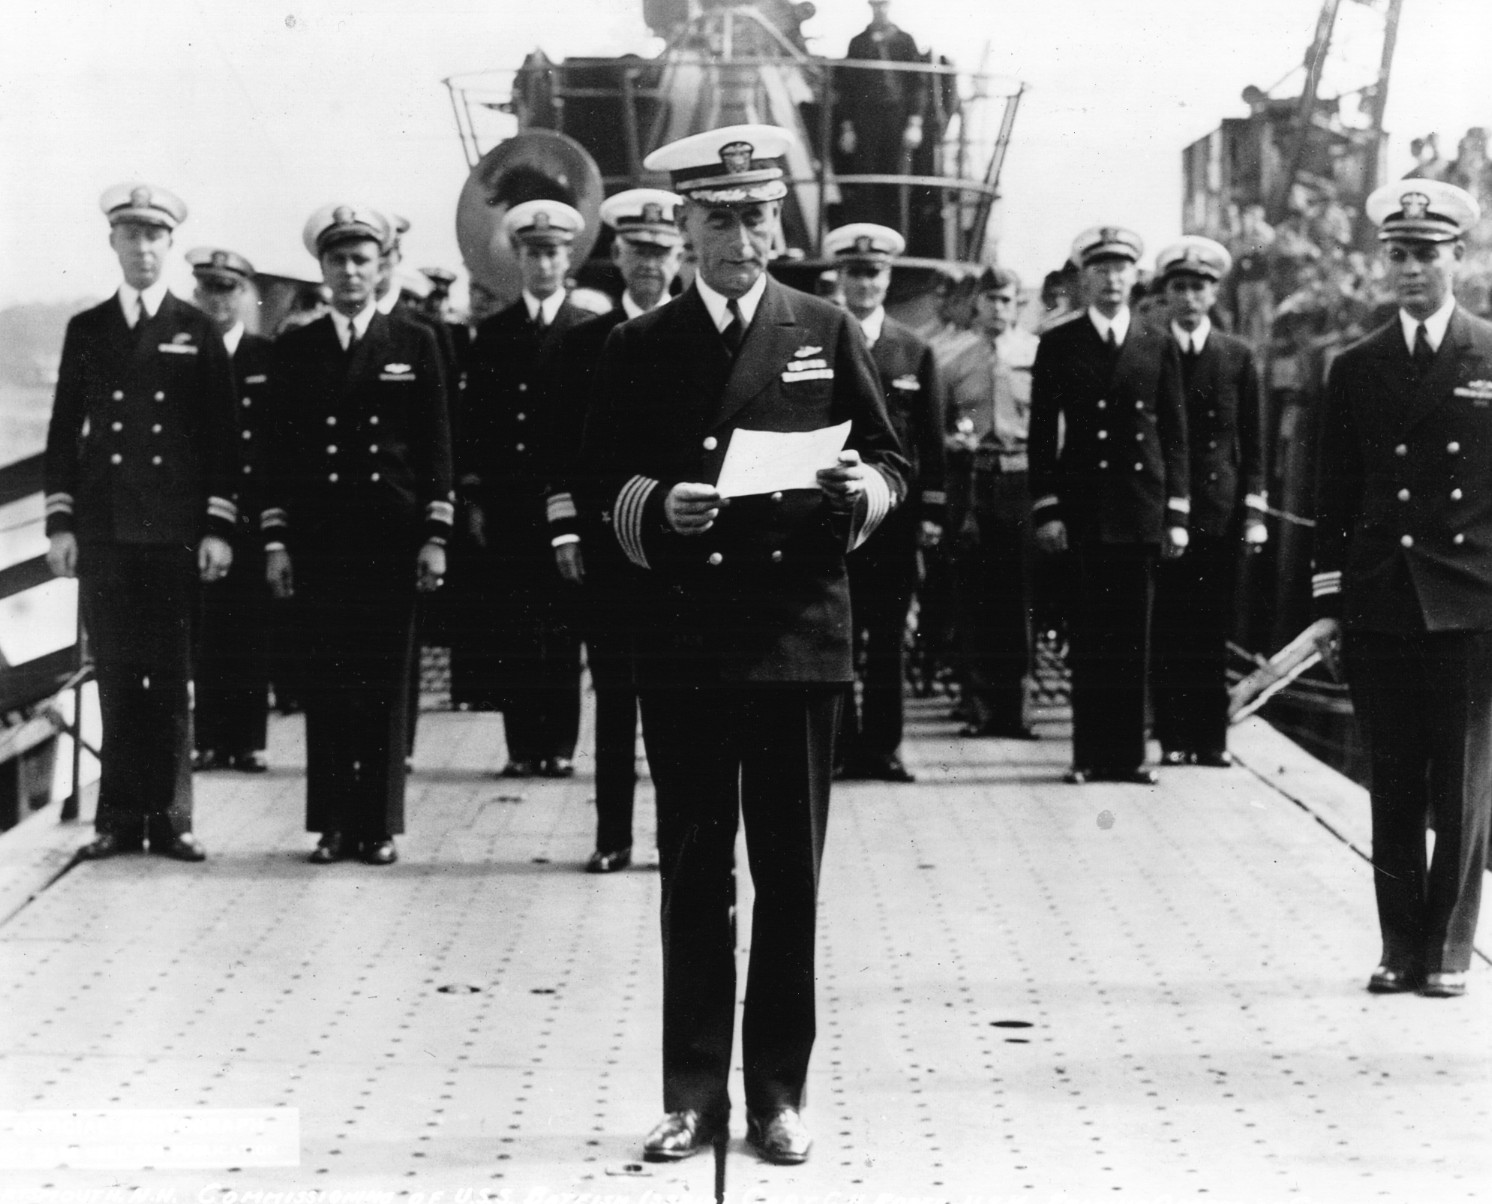 An officer reads orders during the commissioning of the new submarine USS Batfish at the Portsmouth Navy Yard on August 21, 1943.